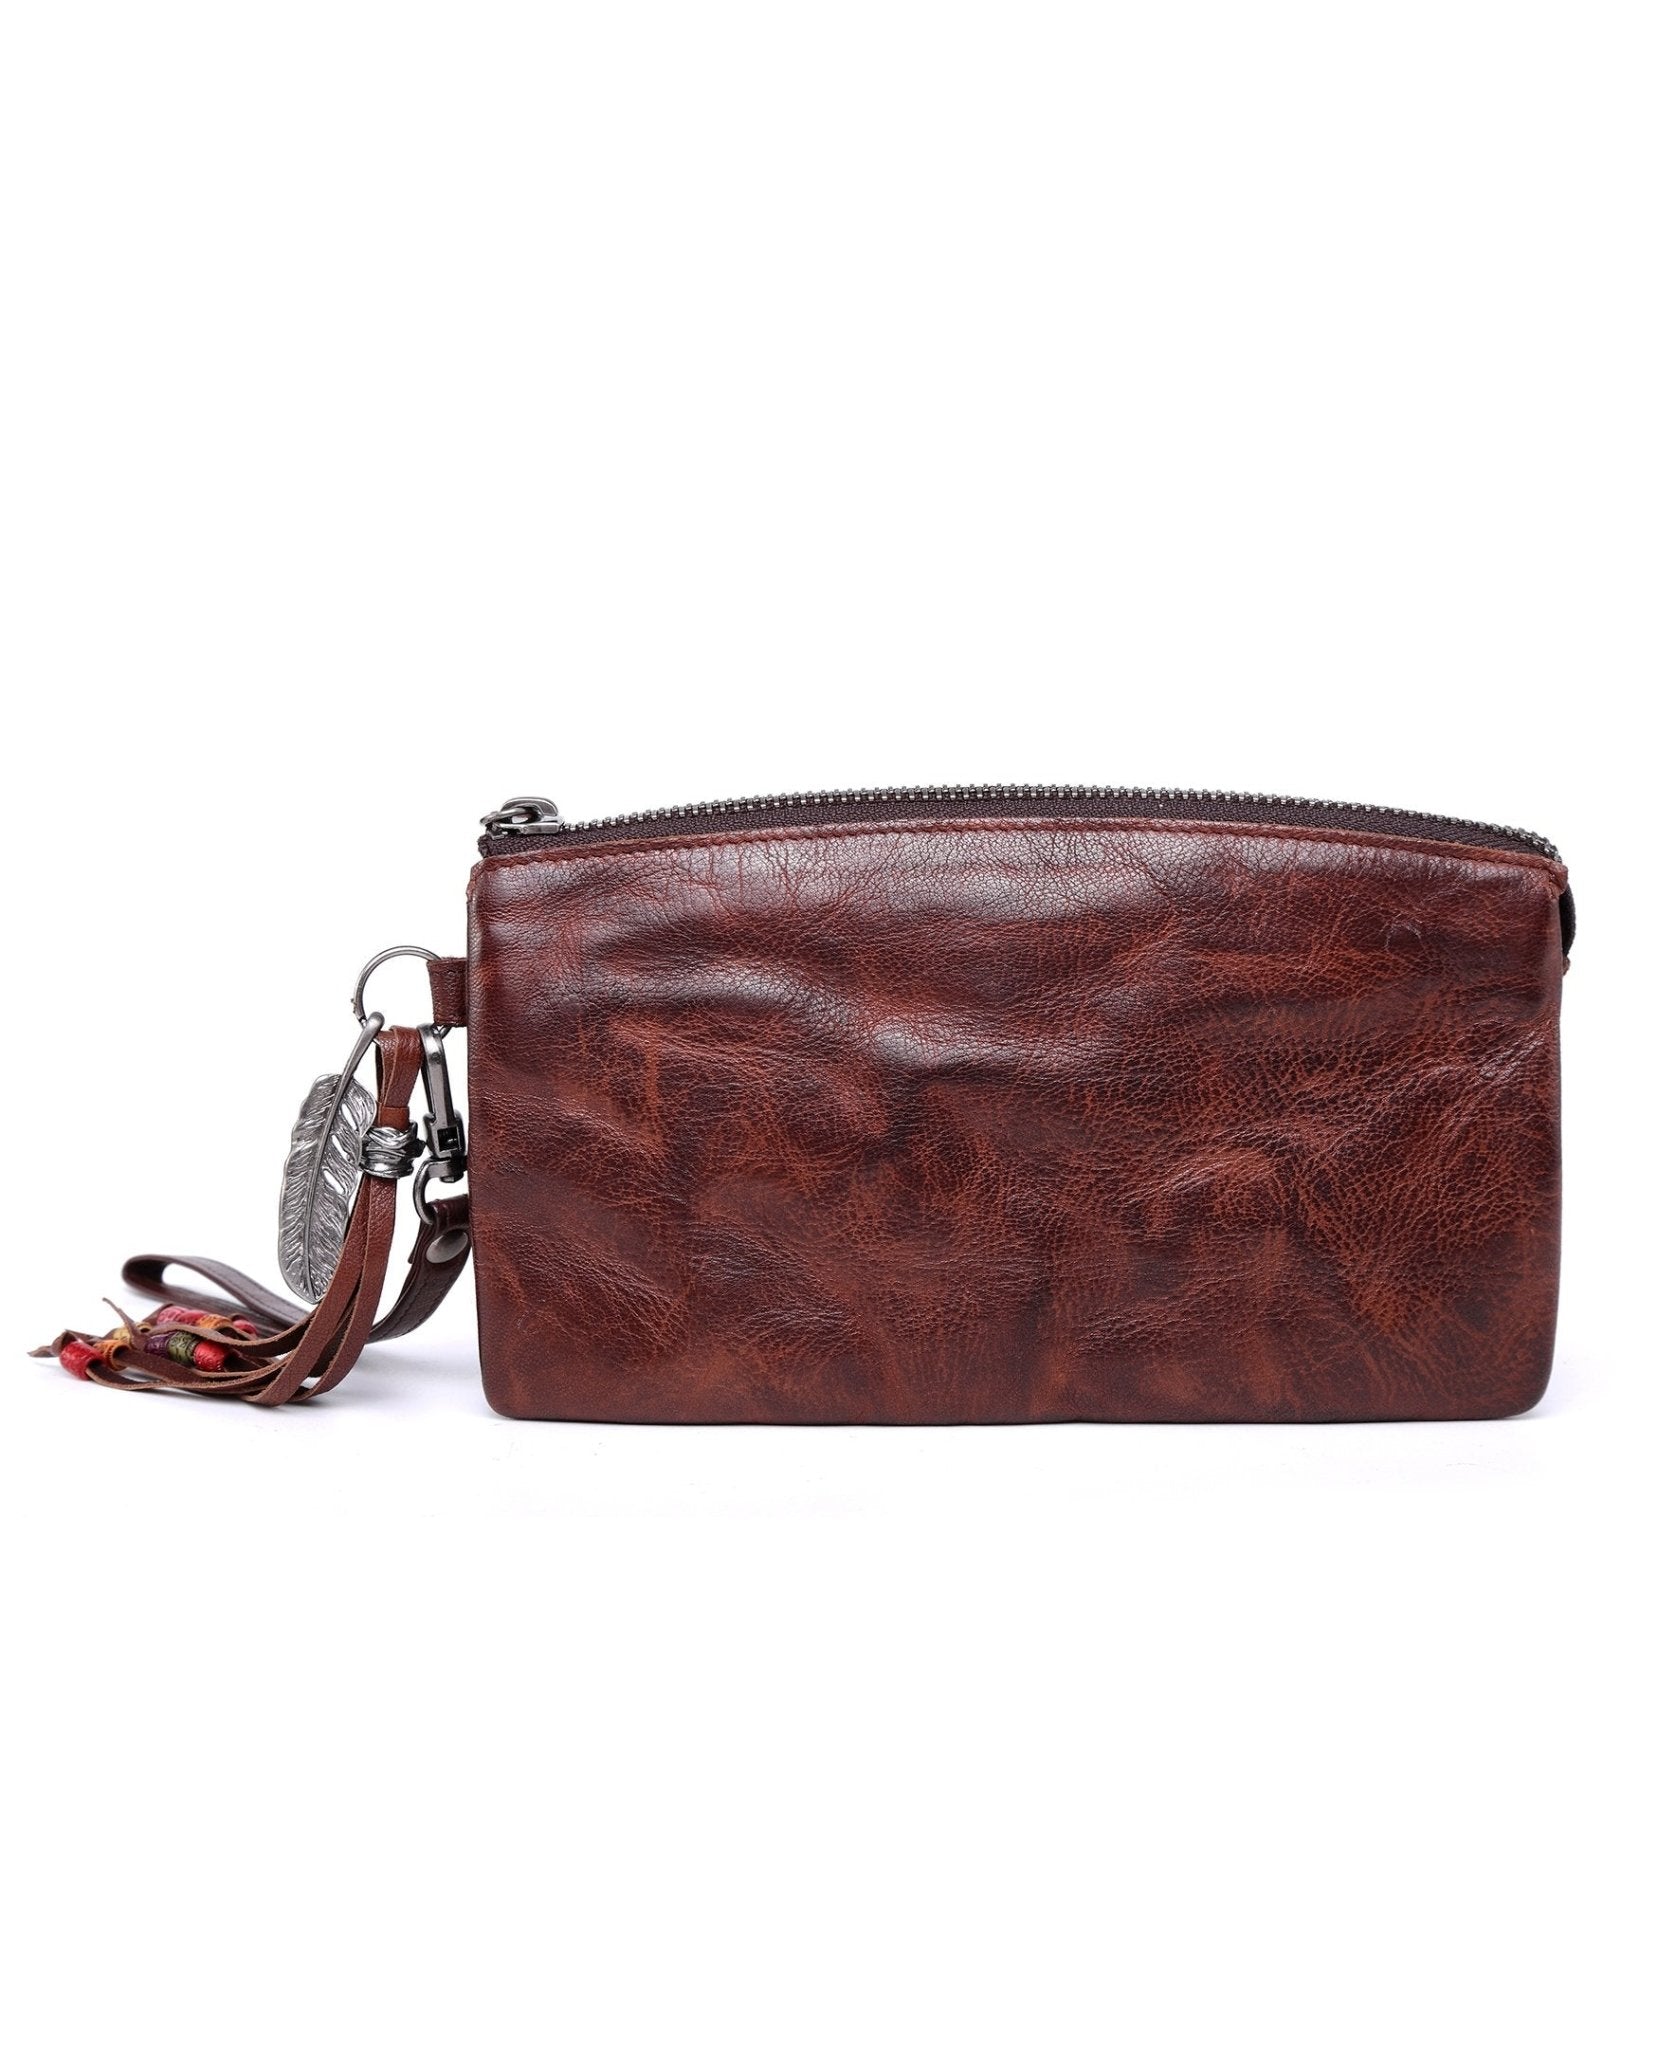 Bags & Luggage - Women's Bags - Clutches Bluebell Leather Clutch